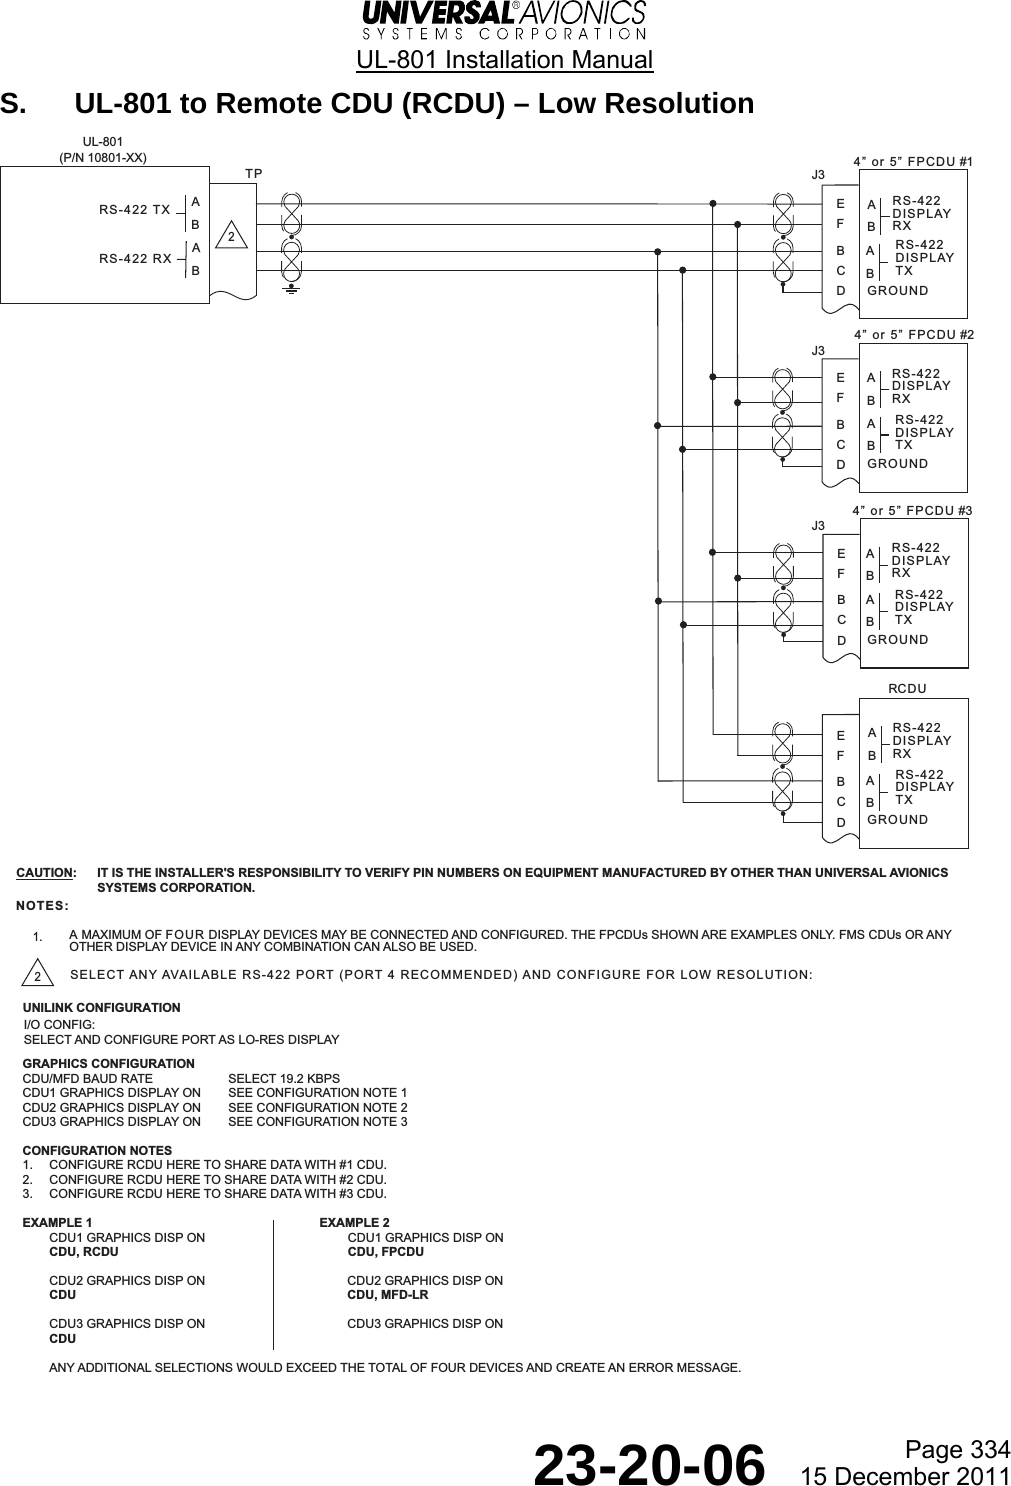  UL-801 Installation Manual  Page 334  23-20-06  15 December 2011 S.  UL-801 to Remote CDU (RCDU) – Low Resolution    RS-422 TXTPUL-801(P/N 10801-XX)2RS-422 RXJ3EDCBFJ3EDCBFJ3EDCBFRS-422DISPLAYTXRS-422DISPLAYRXGROUNDRS-422DISPLAYTXRS-422DISPLAYRXGROUNDRS-422DISPLAYTXRS-422DISPLAYRXGROUNDRS-422DISPLAYTXRS-422DISPLAYRXGROUND4 or 5 FPCDU #14 or 5 FPCDU #2RCDU4 or 5 FPCDU #3NOTES:1.A MAXIMUM OF FOUR DISPLAY DEVICES MAY BE CONNECTED AND CONFIGURED. THE FPCDUs SHOWN ARE EXAMPLES ONLY. FMS CDUs OR ANYOTHER DISPLAY DEVICE IN ANY COMBINATION CAN ALSO BE USED.2SELECT ANY AVAILABLE RS-422 PORT (PORT 4 RECOMMENDED) AND CONFIGURE FOR LOW RESOLUTION:CAUTION:  IT IS THE INSTALLER&apos;S RESPONSIBILITY TO VERIFY PIN NUMBERS ON EQUIPMENT MANUFACTURED BY OTHER THAN UNIVERSAL AVIONICS SYSTEMS CORPORATION.SELECT AND CONFIGURE PORT AS LO-RES DISPLAYI/O CONFIG:UNILINK CONFIGURATIONGRAPHICS CONFIGURATIONCDU/MFD BAUD RATE SELECT 19.2 KBPSCDU1 GRAPHICS DISPLAY ON SEE CONFIGURATION NOTE 1CDU2 GRAPHICS DISPLAY ON SEE CONFIGURATION NOTE 2CDU3 GRAPHICS DISPLAY ON SEE CONFIGURATION NOTE 3CONFIGURATION NOTES1. CONFIGURE RCDU HERE TO SHARE DATA WITH #1 CDU.2. CONFIGURE RCDU HERE TO SHARE DATA WITH #2 CDU.3. CONFIGURE RCDU HERE TO SHARE DATA WITH #3 CDU.EXAMPLE 1 EXAMPLE 2CDU1 GRAPHICS DISP ON CDU1 GRAPHICS DISP ONCDU, RCDU CDU, FPCDUCDU2 GRAPHICS DISP ON CDU2 GRAPHICS DISP ONCDU CDU, MFD-LRCDU3 GRAPHICS DISP ON CDU3 GRAPHICS DISP ONCDUANY ADDITIONAL SELECTIONS WOULD EXCEED THE TOTAL OF FOUR DEVICES AND CREATE AN ERROR MESSAGE.EDCBFABABABABABABABABABAB